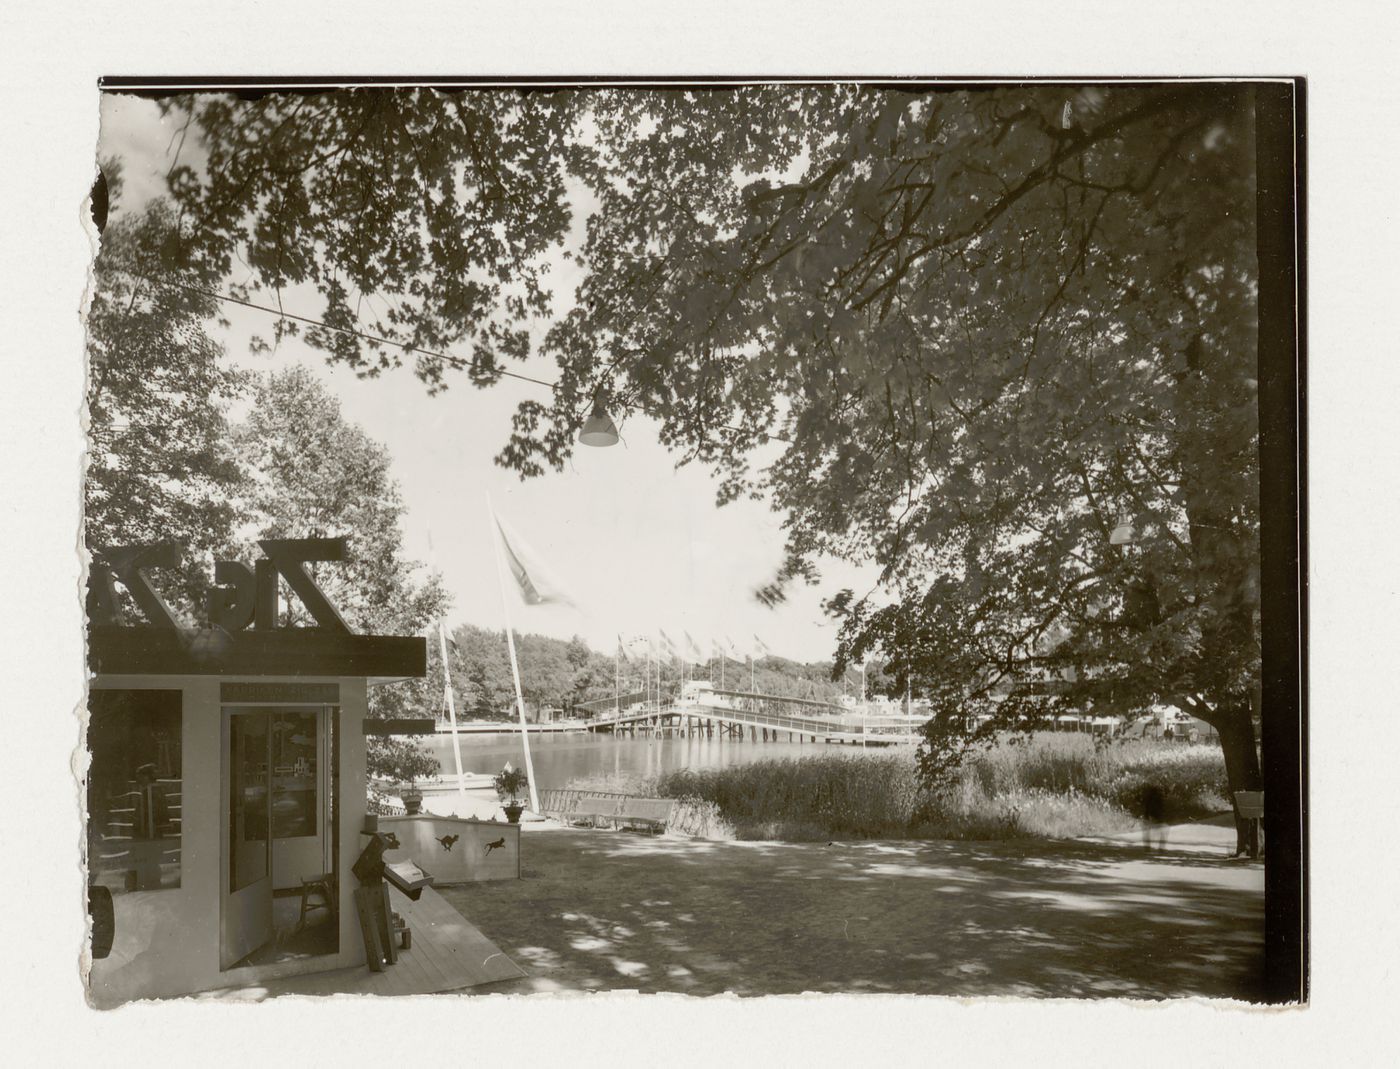 View of the Stockholm Exhibition of 1930 showing a kiosk and a bridge in the background, Stockholm